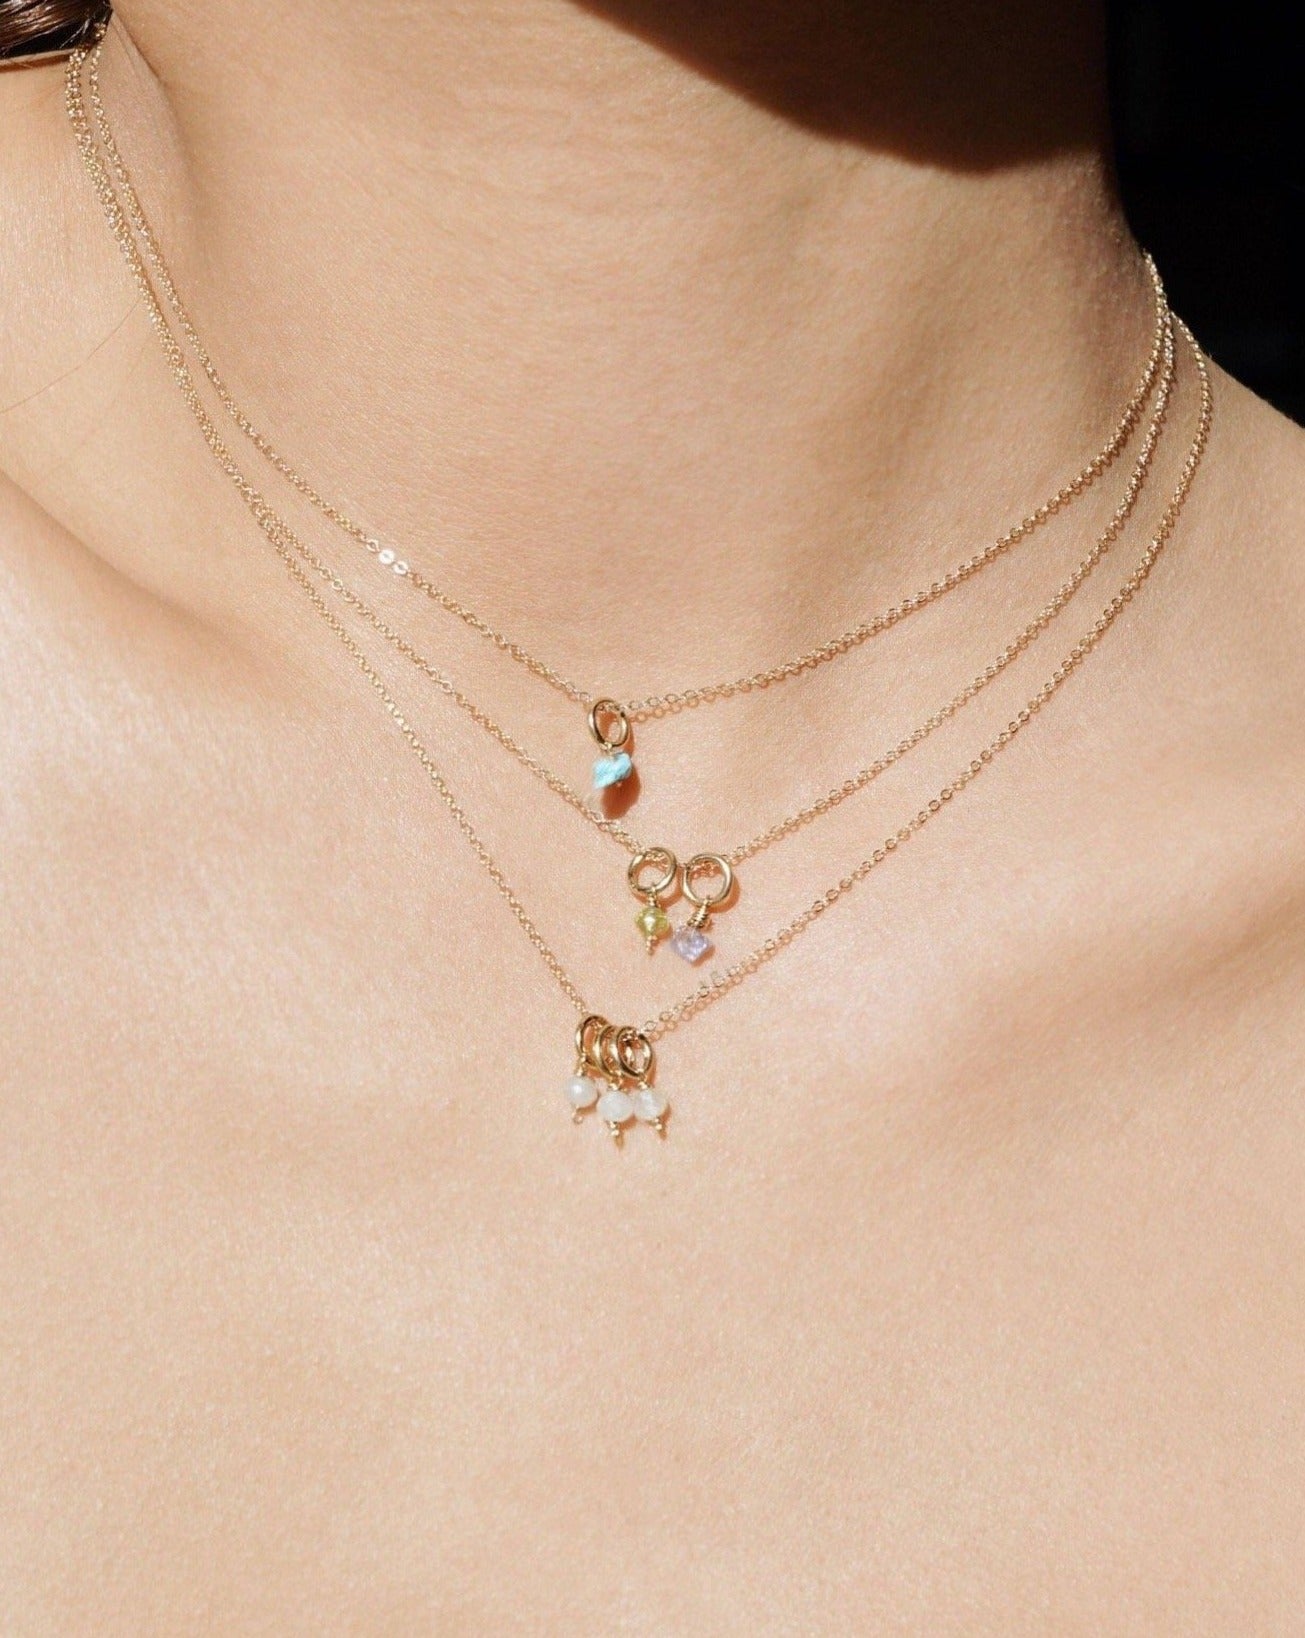 One Love Birthstone Necklace by KOZAKH. A necklace crafted in 14K Gold Filled, featuring customizable Birthstone charms and is available in 4 adjustable lengths.